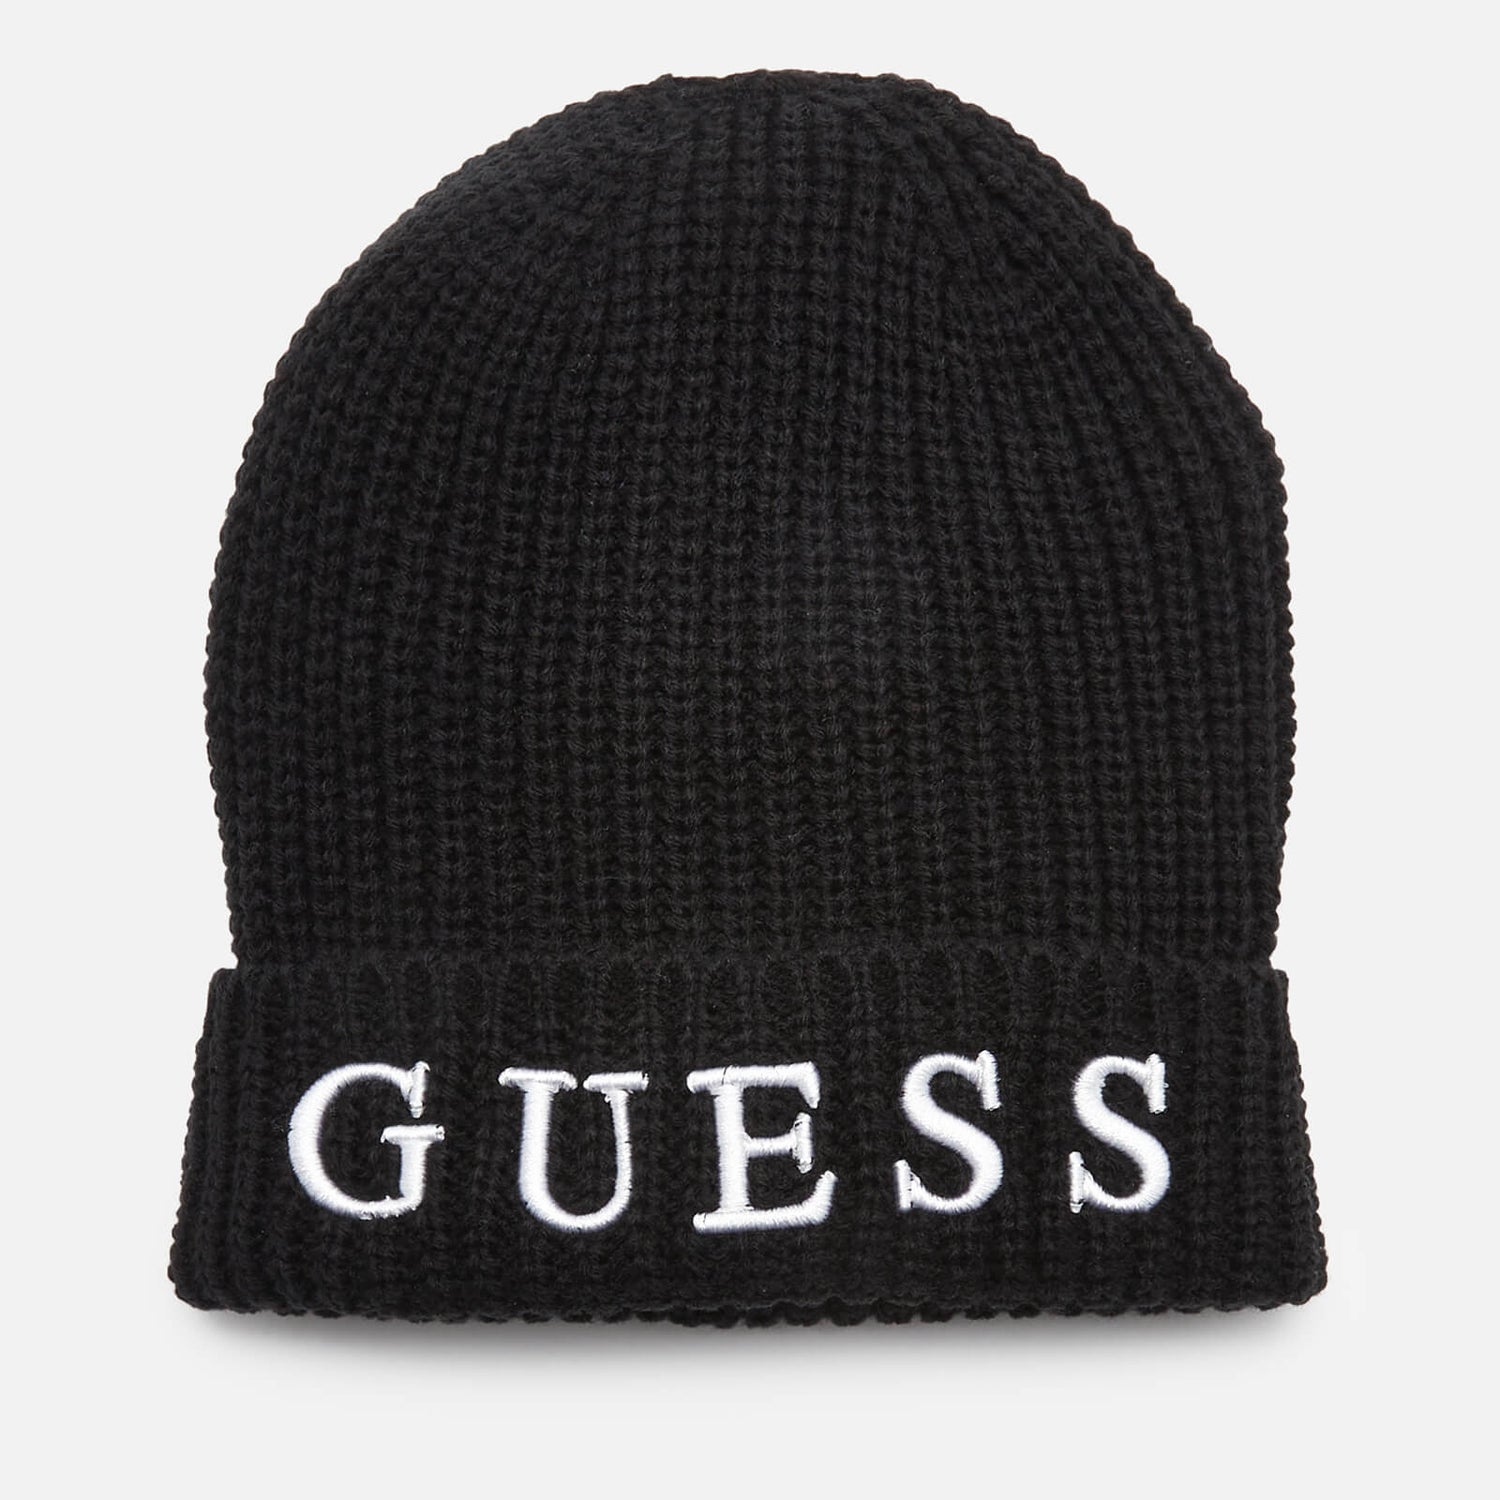 Guess Girls' Unisex Hat - Jet Black - Small